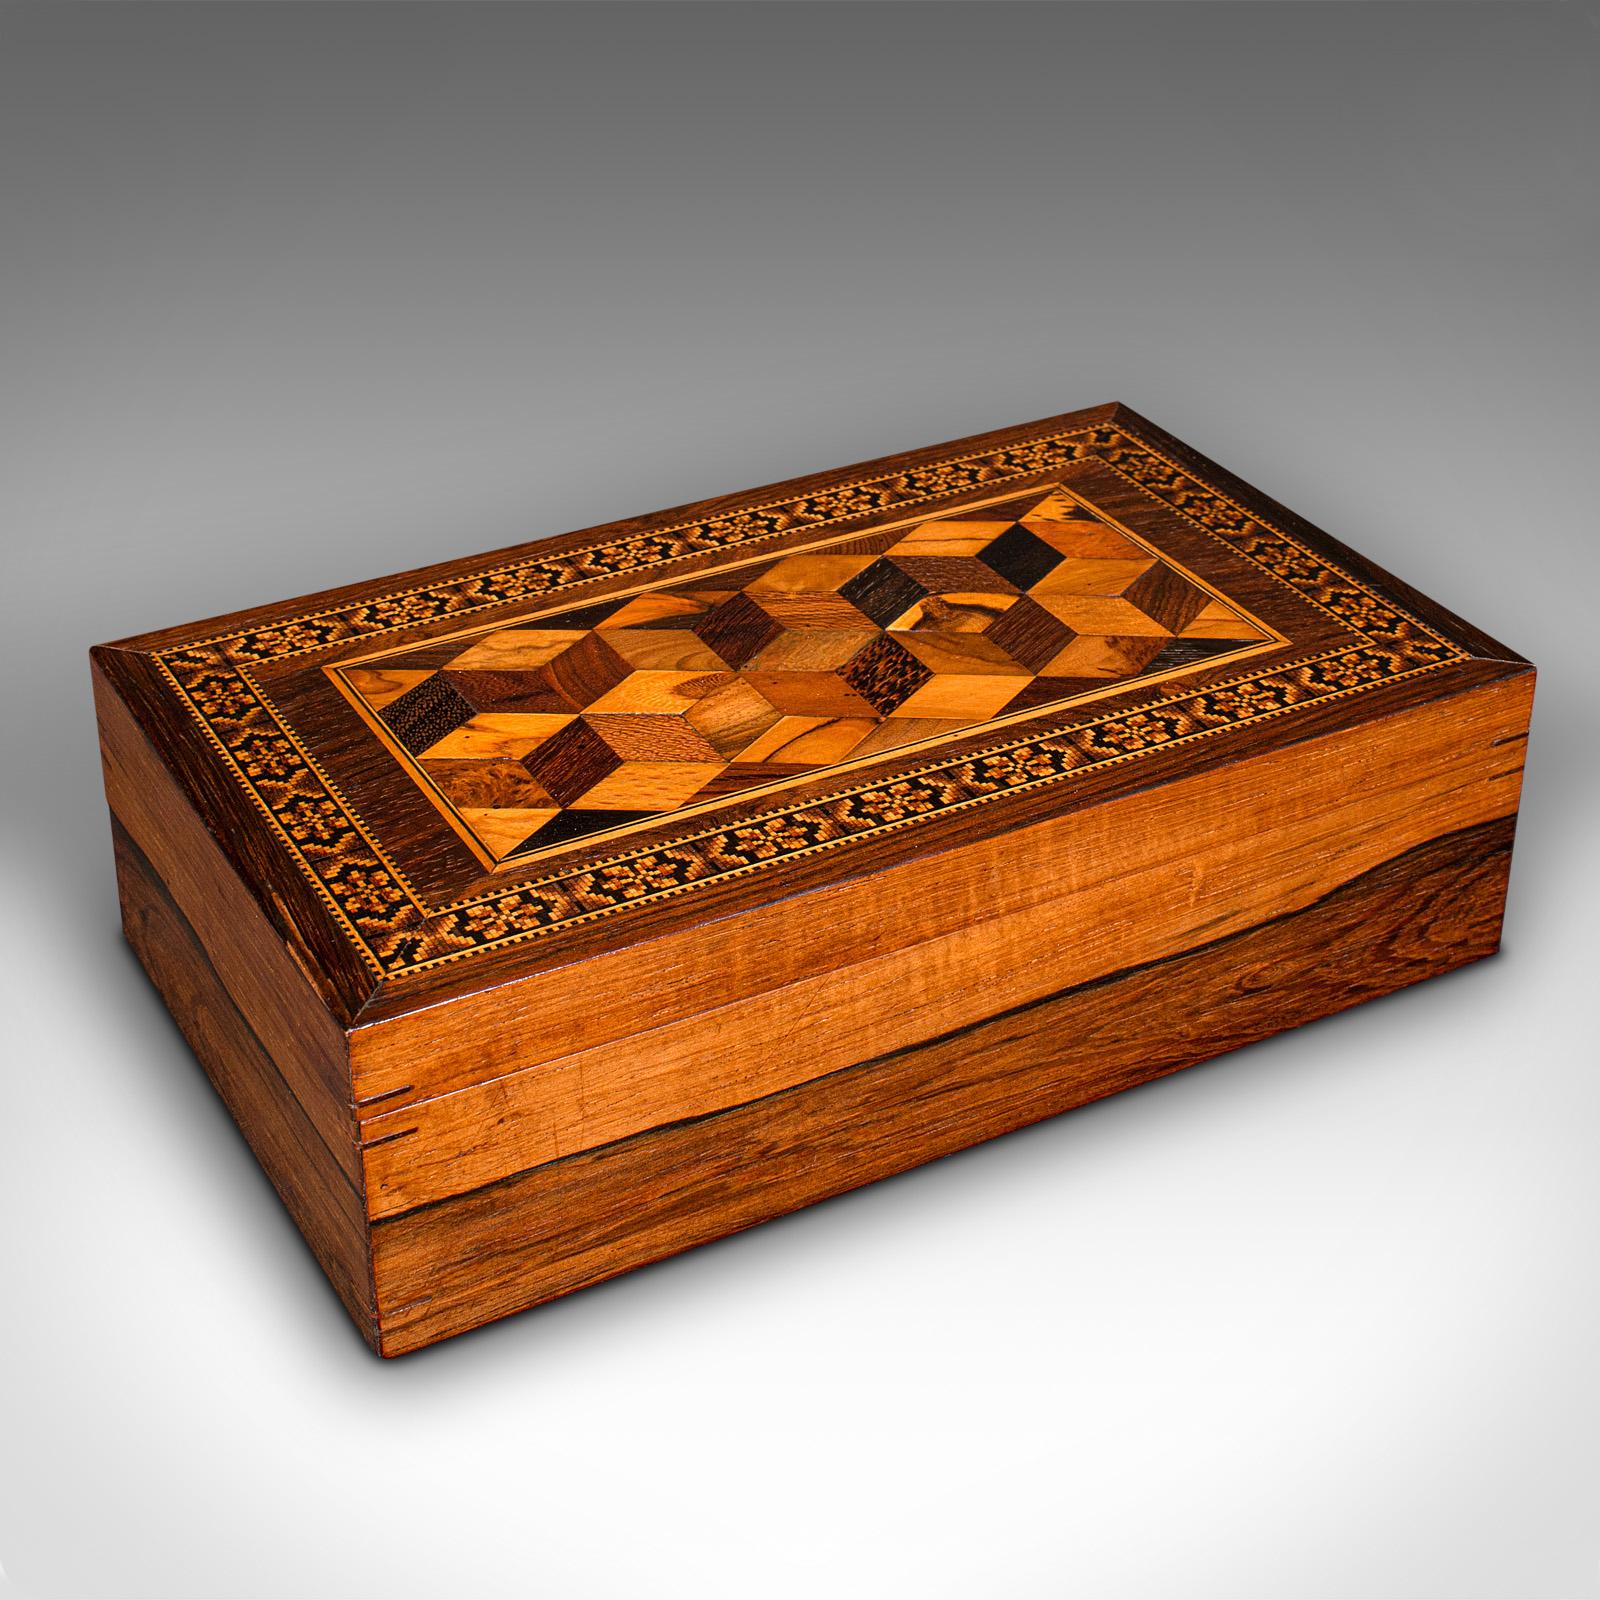 This is an antique decorative cigar box. An English, Tunbridge ware inlaid keepsake box or desk tidy, dating to the late Victorian period, circa 1900.

Striking marquetry accentuates this wonderful cigar keeper
Displaying a desirable aged patina